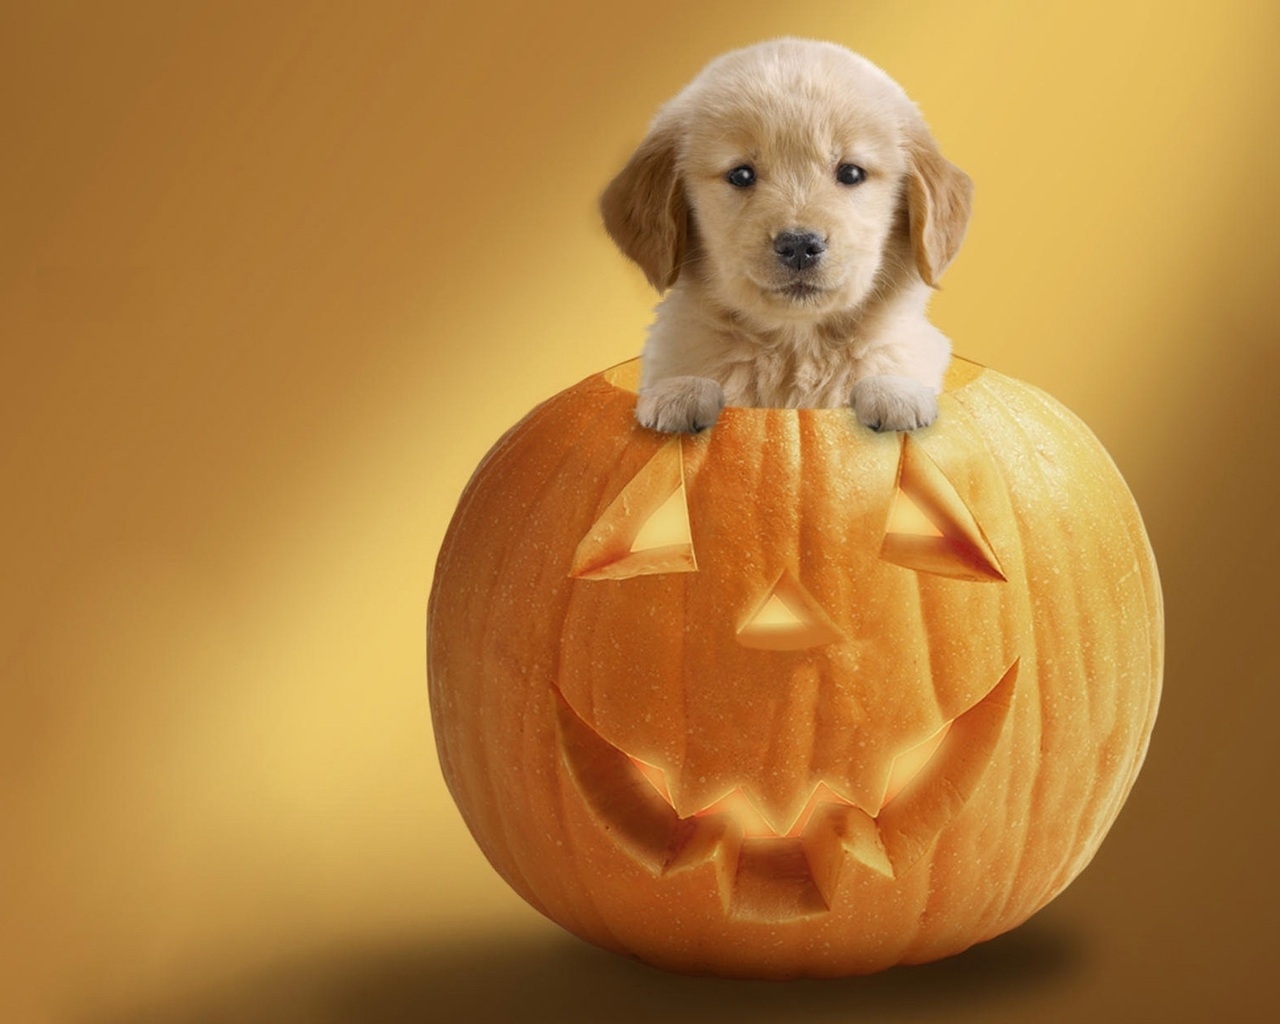 Dog Ready For Halloween for 1280 x 1024 resolution